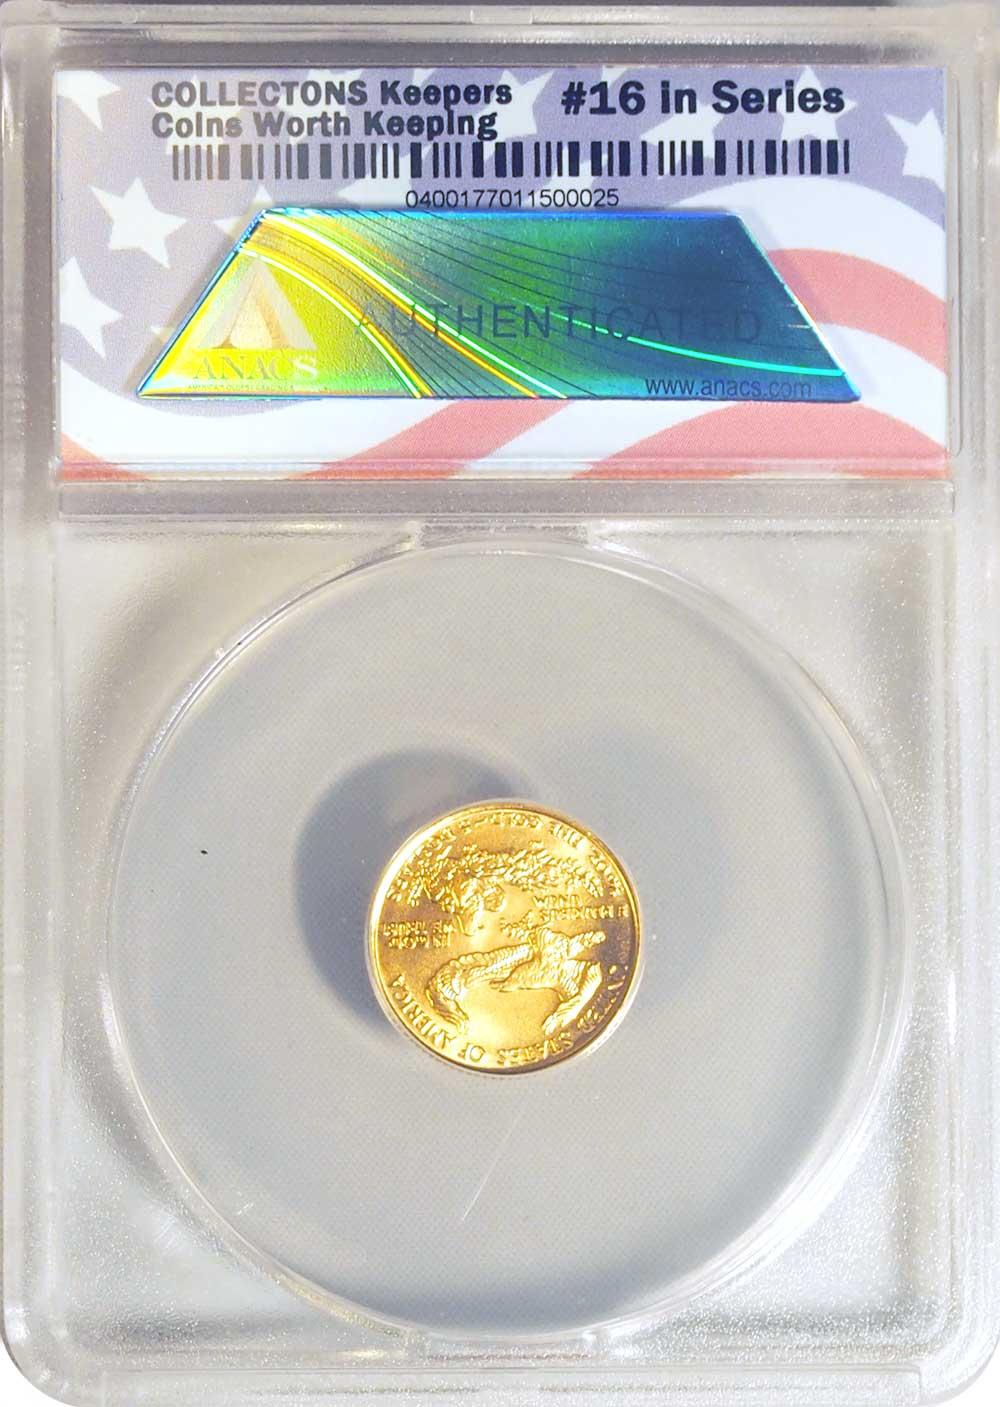 CollecTons Keepers #16: 1986 Uncirculated American Gold Eagle $5 Coin Certified in Exclusive ANACS Brilliant Uncirculated Holder